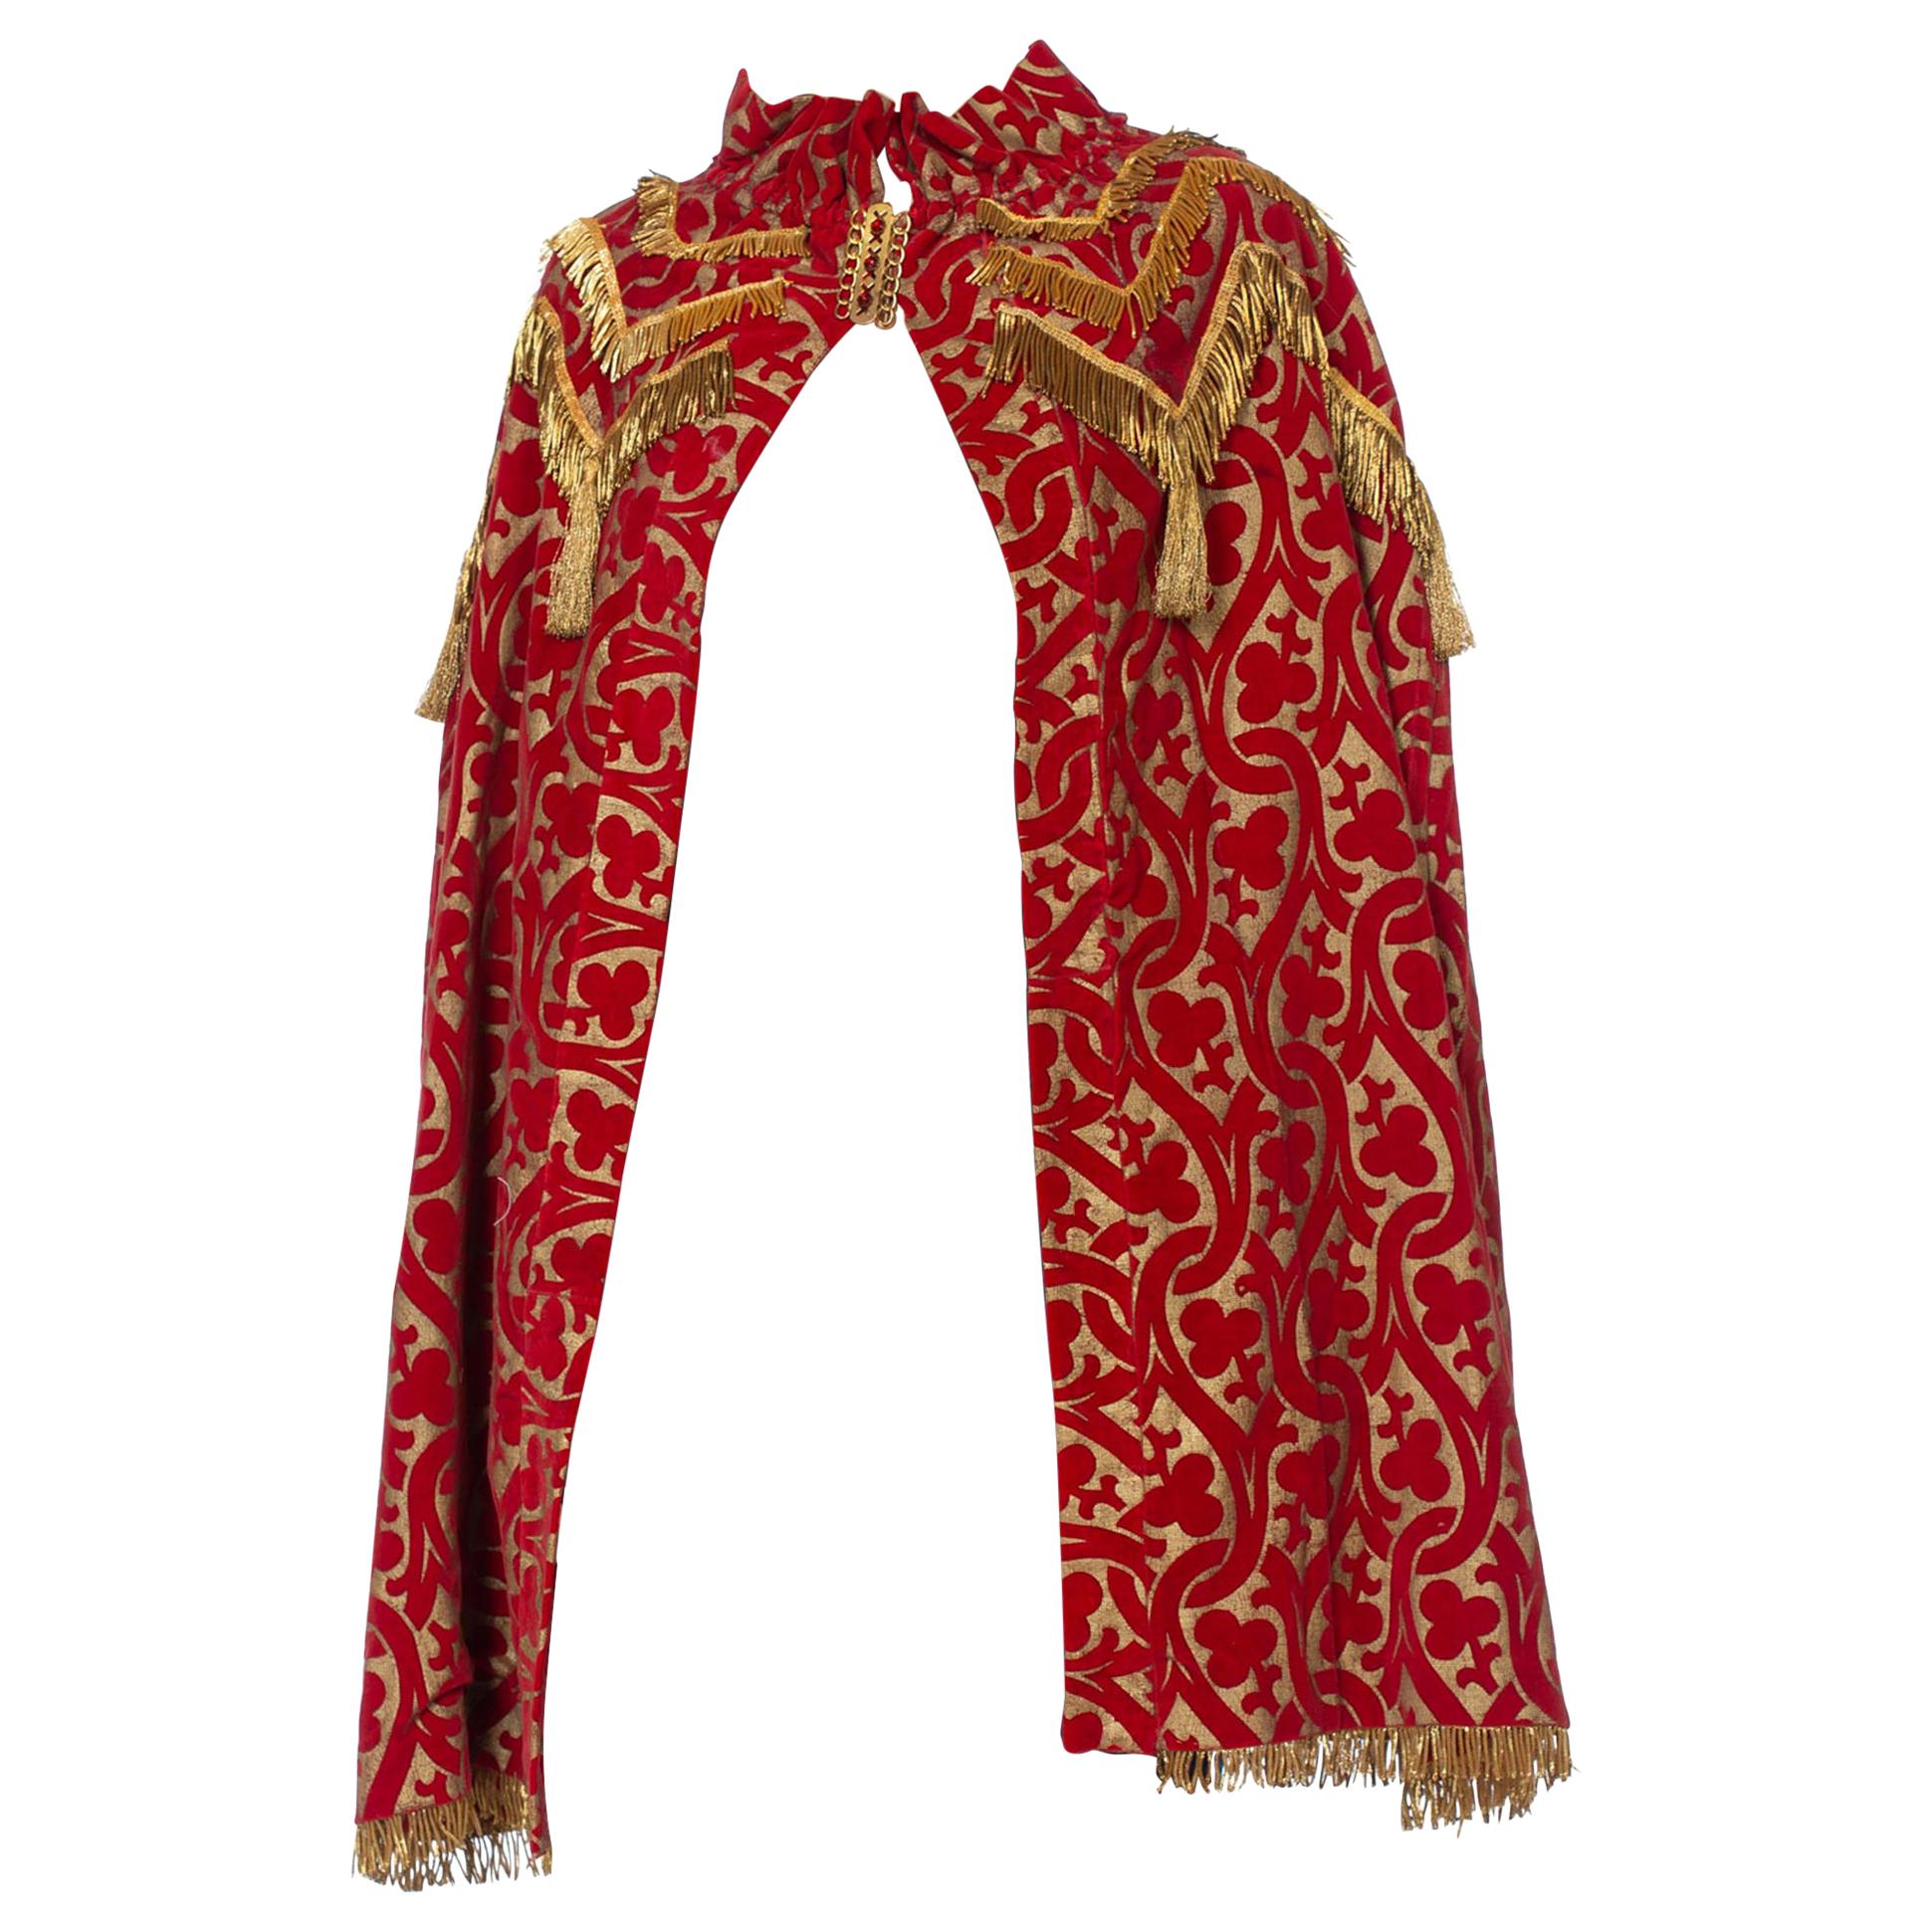 MORPHEW COLLECTION Red Metallic Printed Velvet Silk Lined Cape With Real Gold B